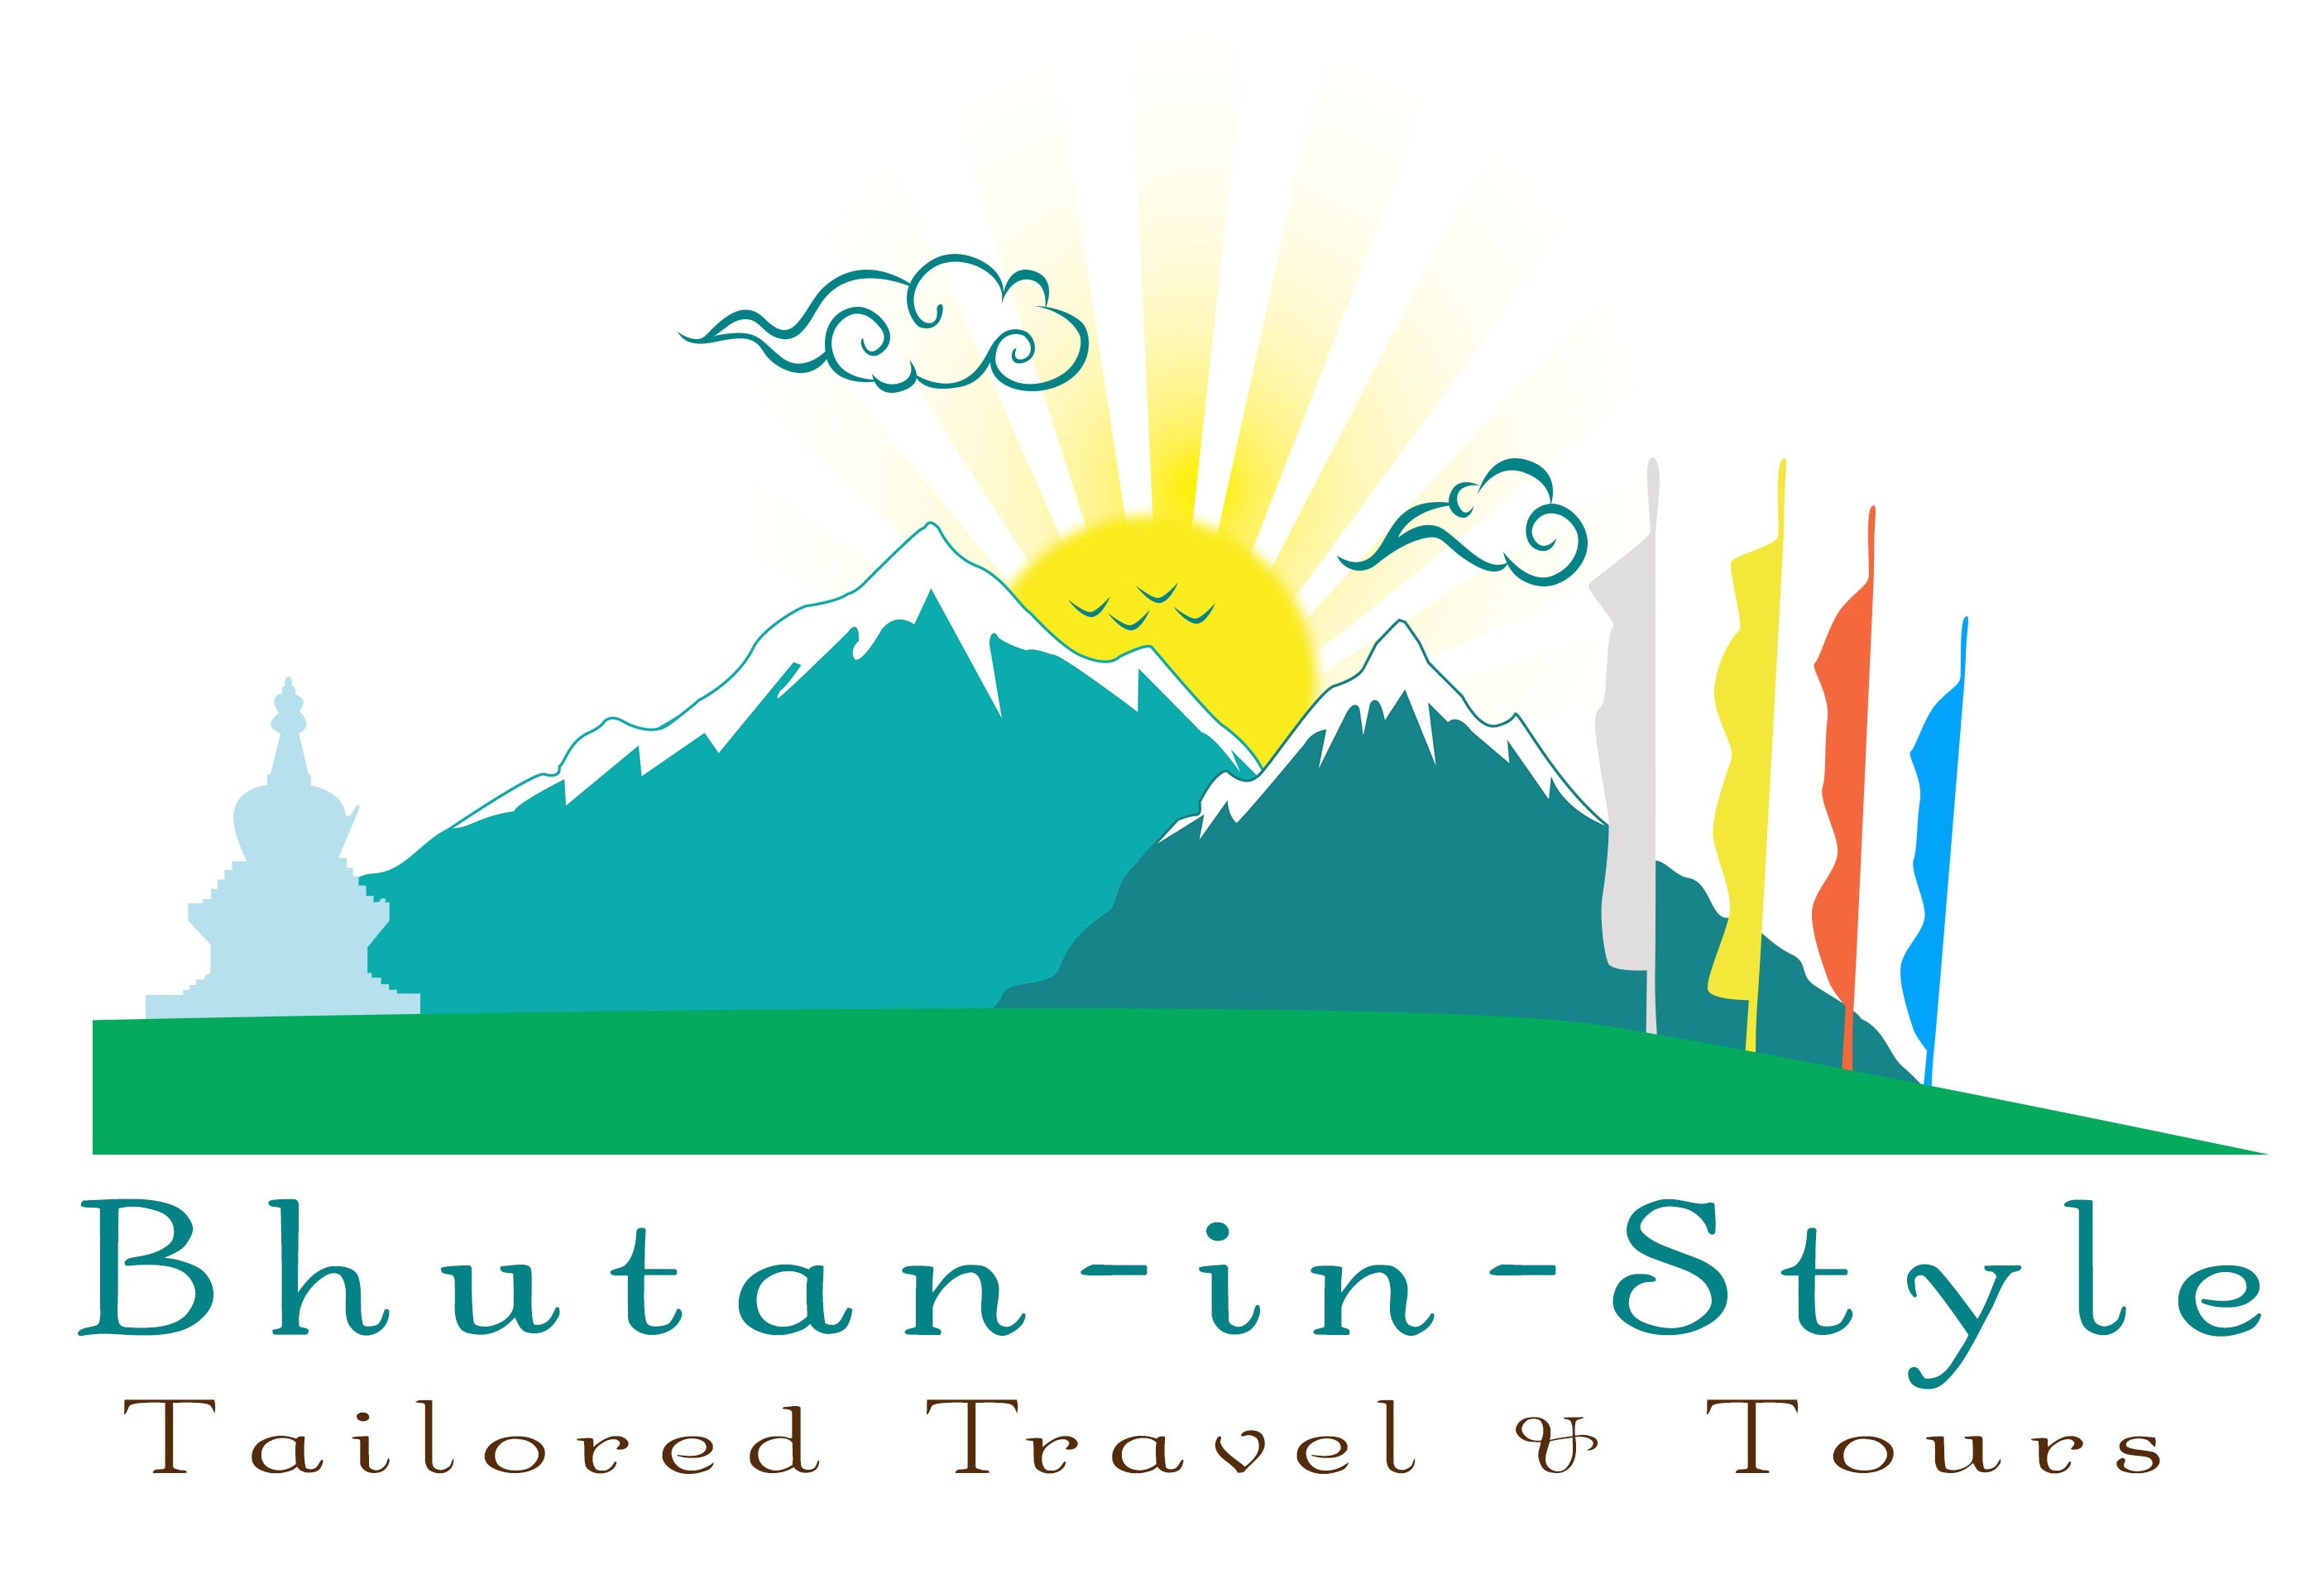 importance of tourism in bhutan